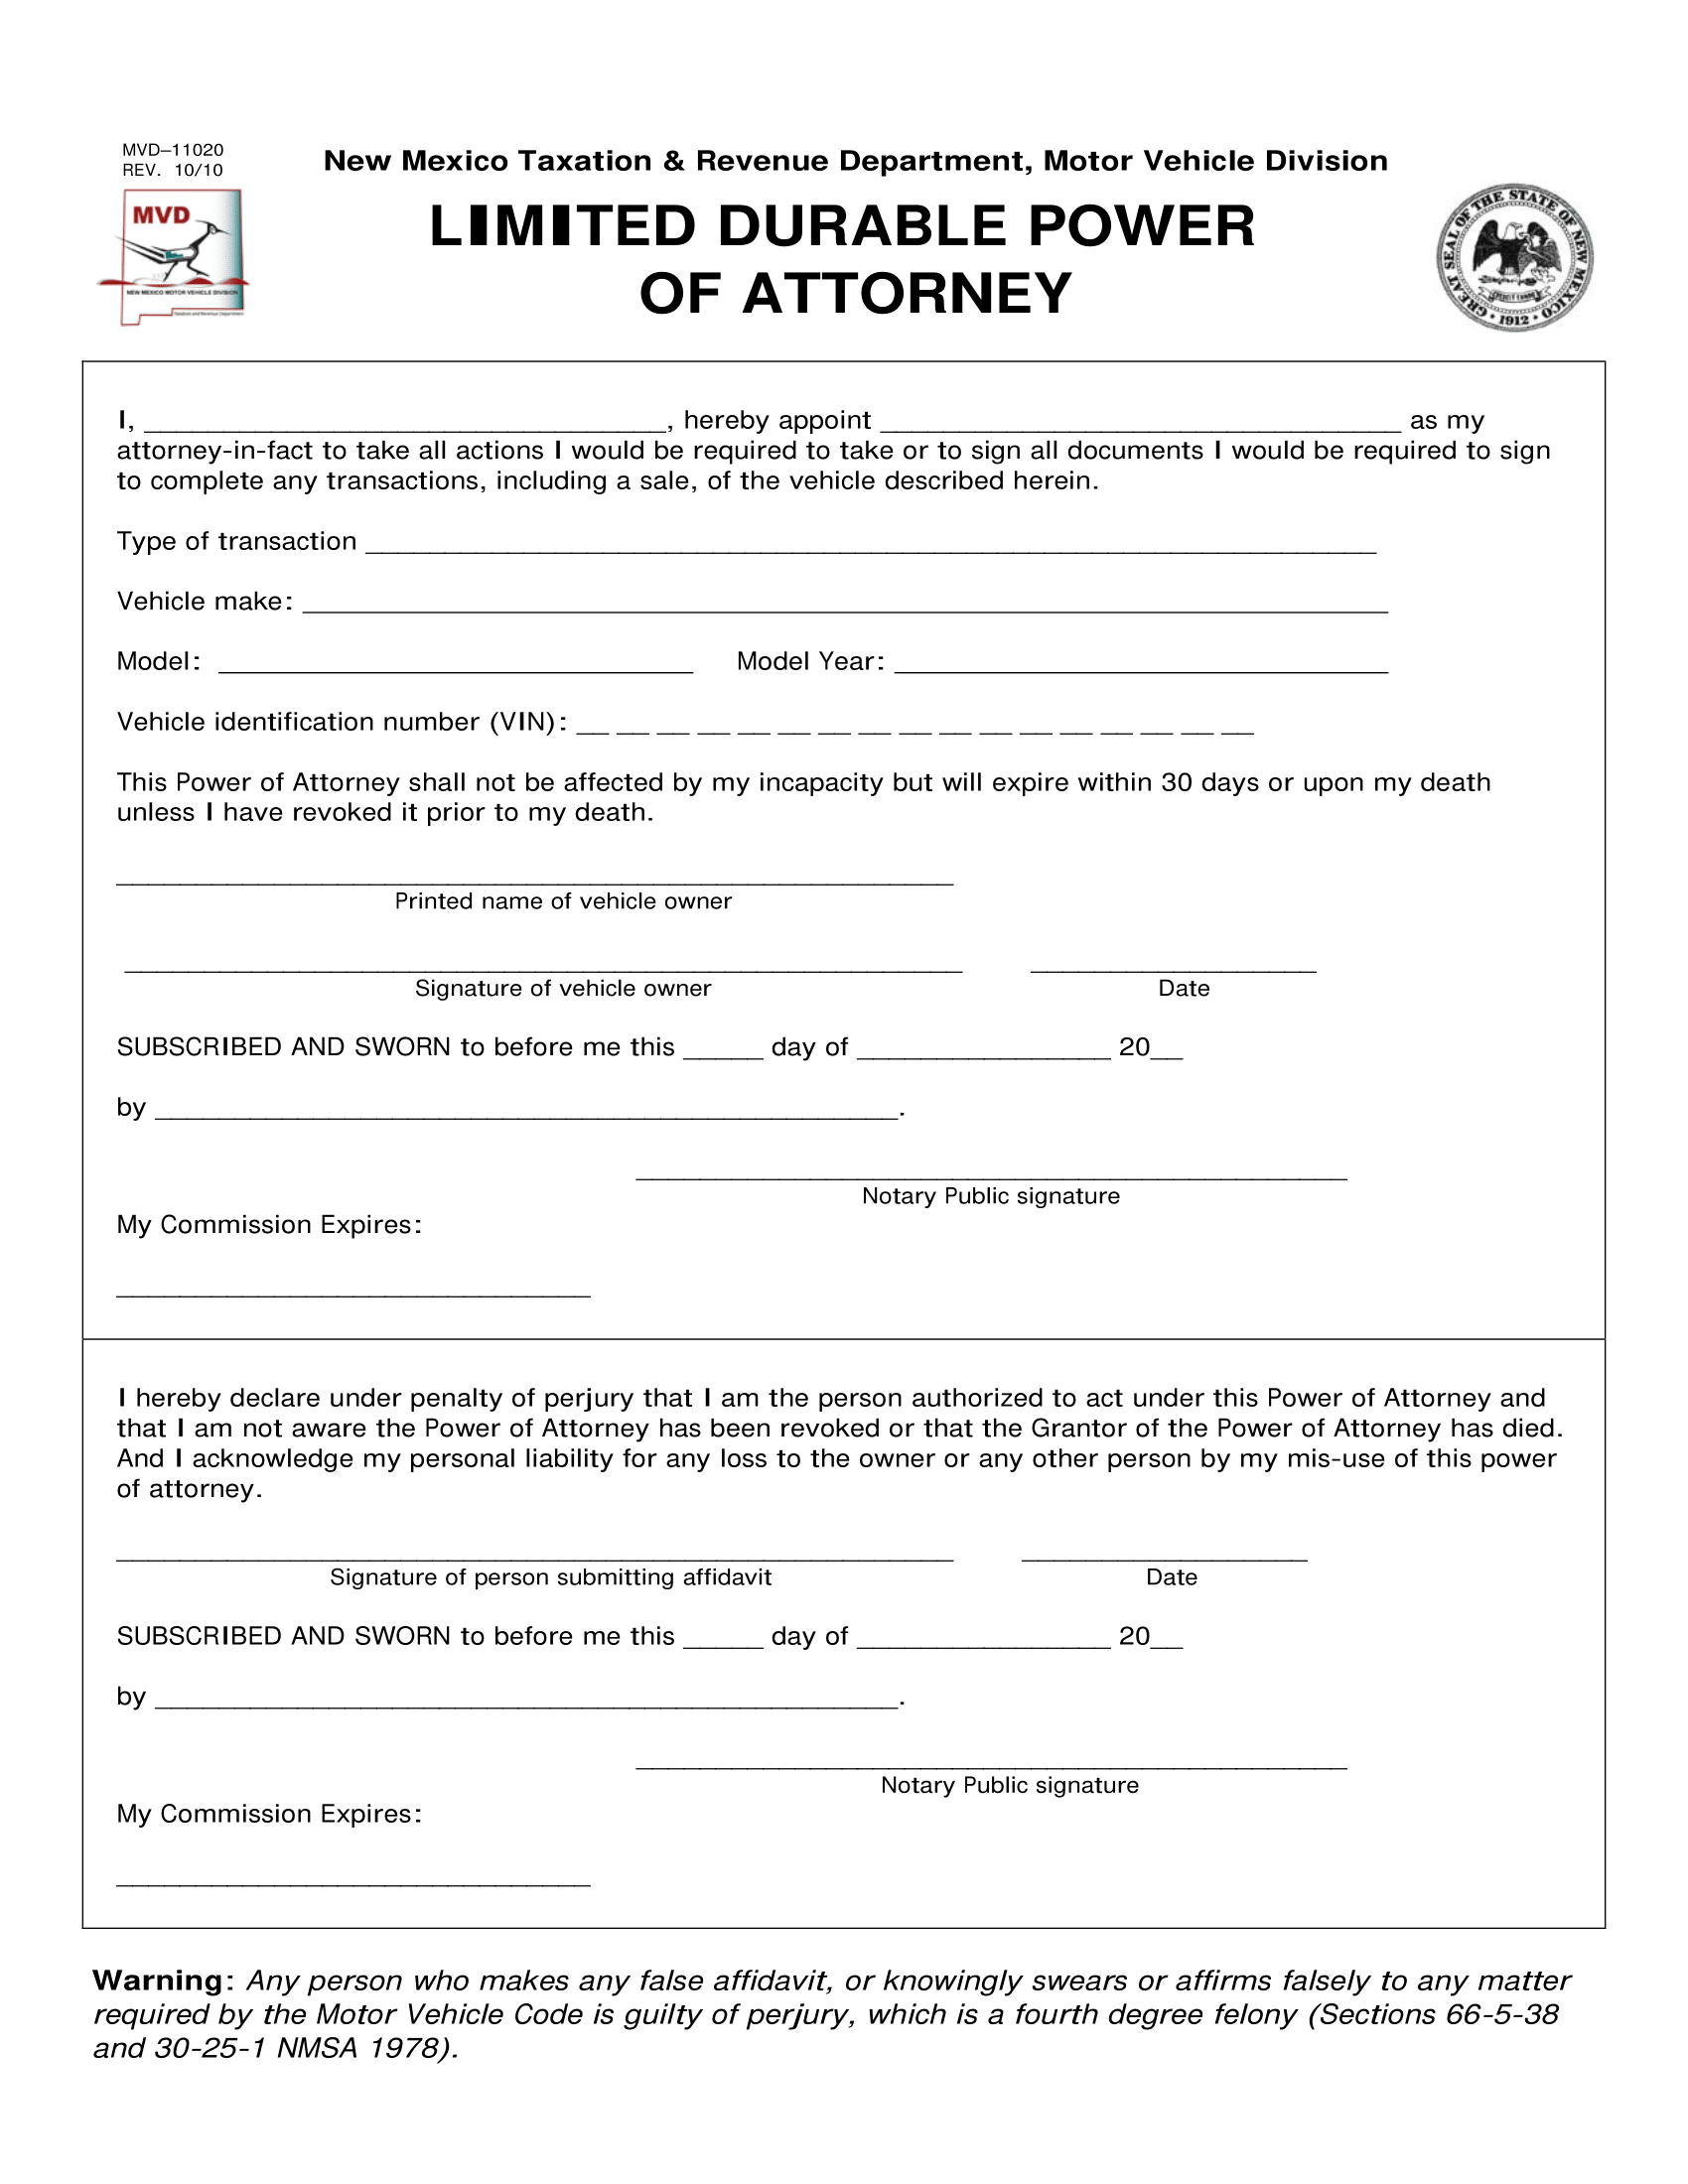 New Mexico Motor Vehicle Power of Attorney Form MVD-11020